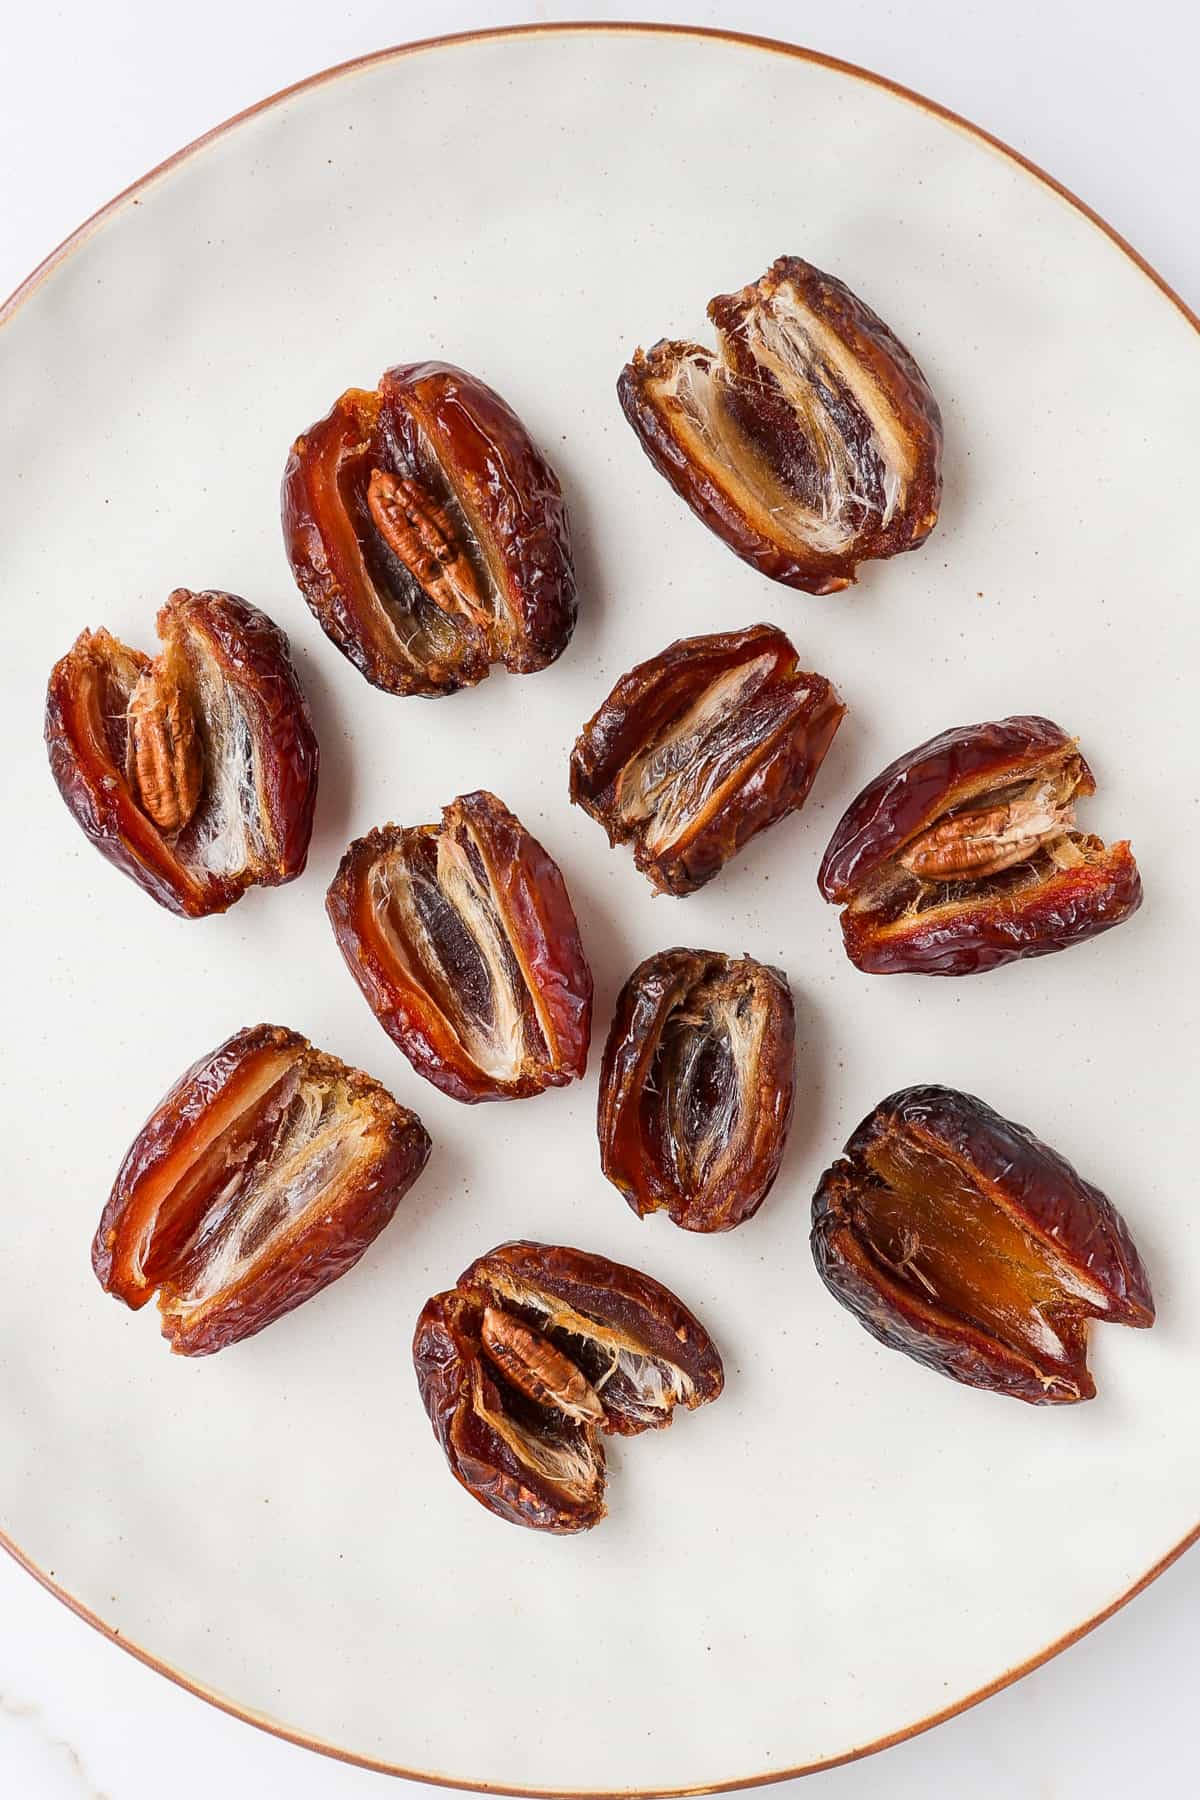 Medjool dates cut open with pits removed.